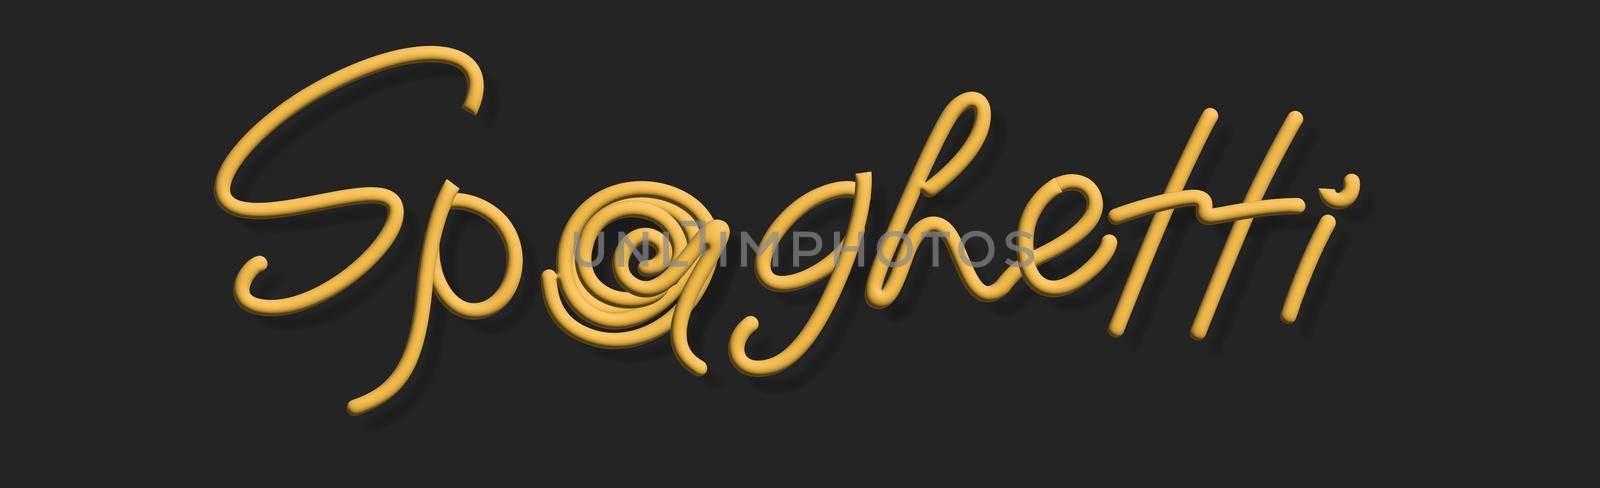 Text stylized written spaghetti. Stylish design for a brand, label or advertisement - 3D image by BEMPhoto